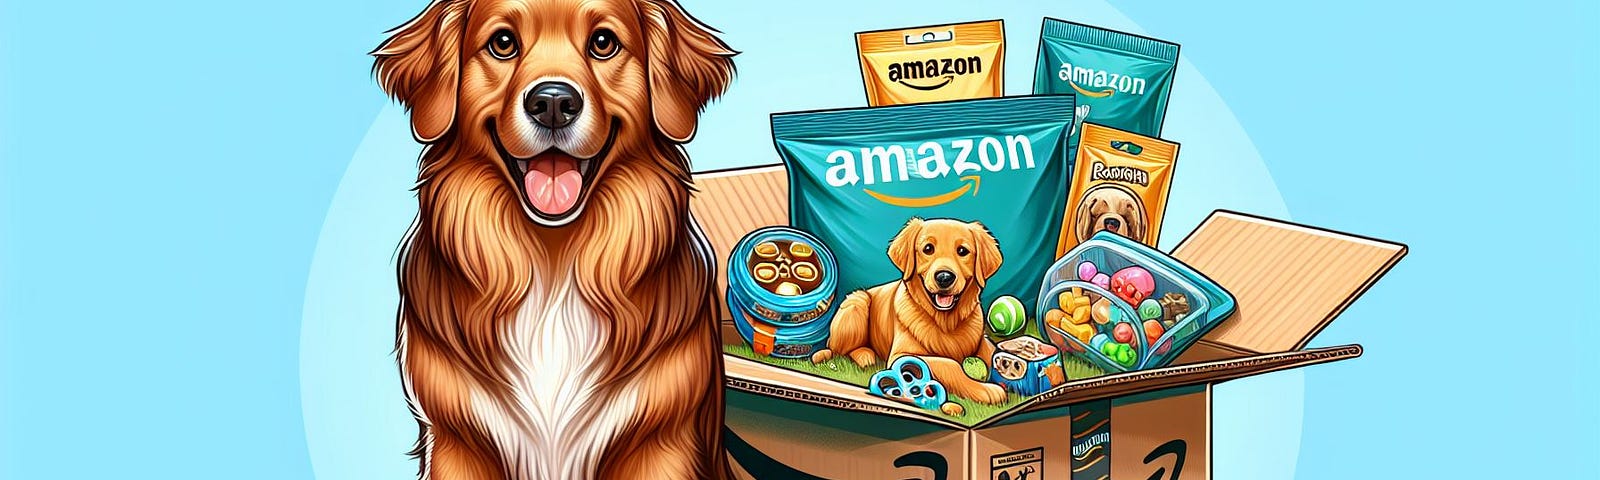 An adorable, well-groomed dog sitting proudly next to an open Amazon package overflowing with pet toys and treats. The dog, perhaps a golden retriever, looks directly at the viewer with a warm, inviting expression. The package prominently displays the Amazon logo.